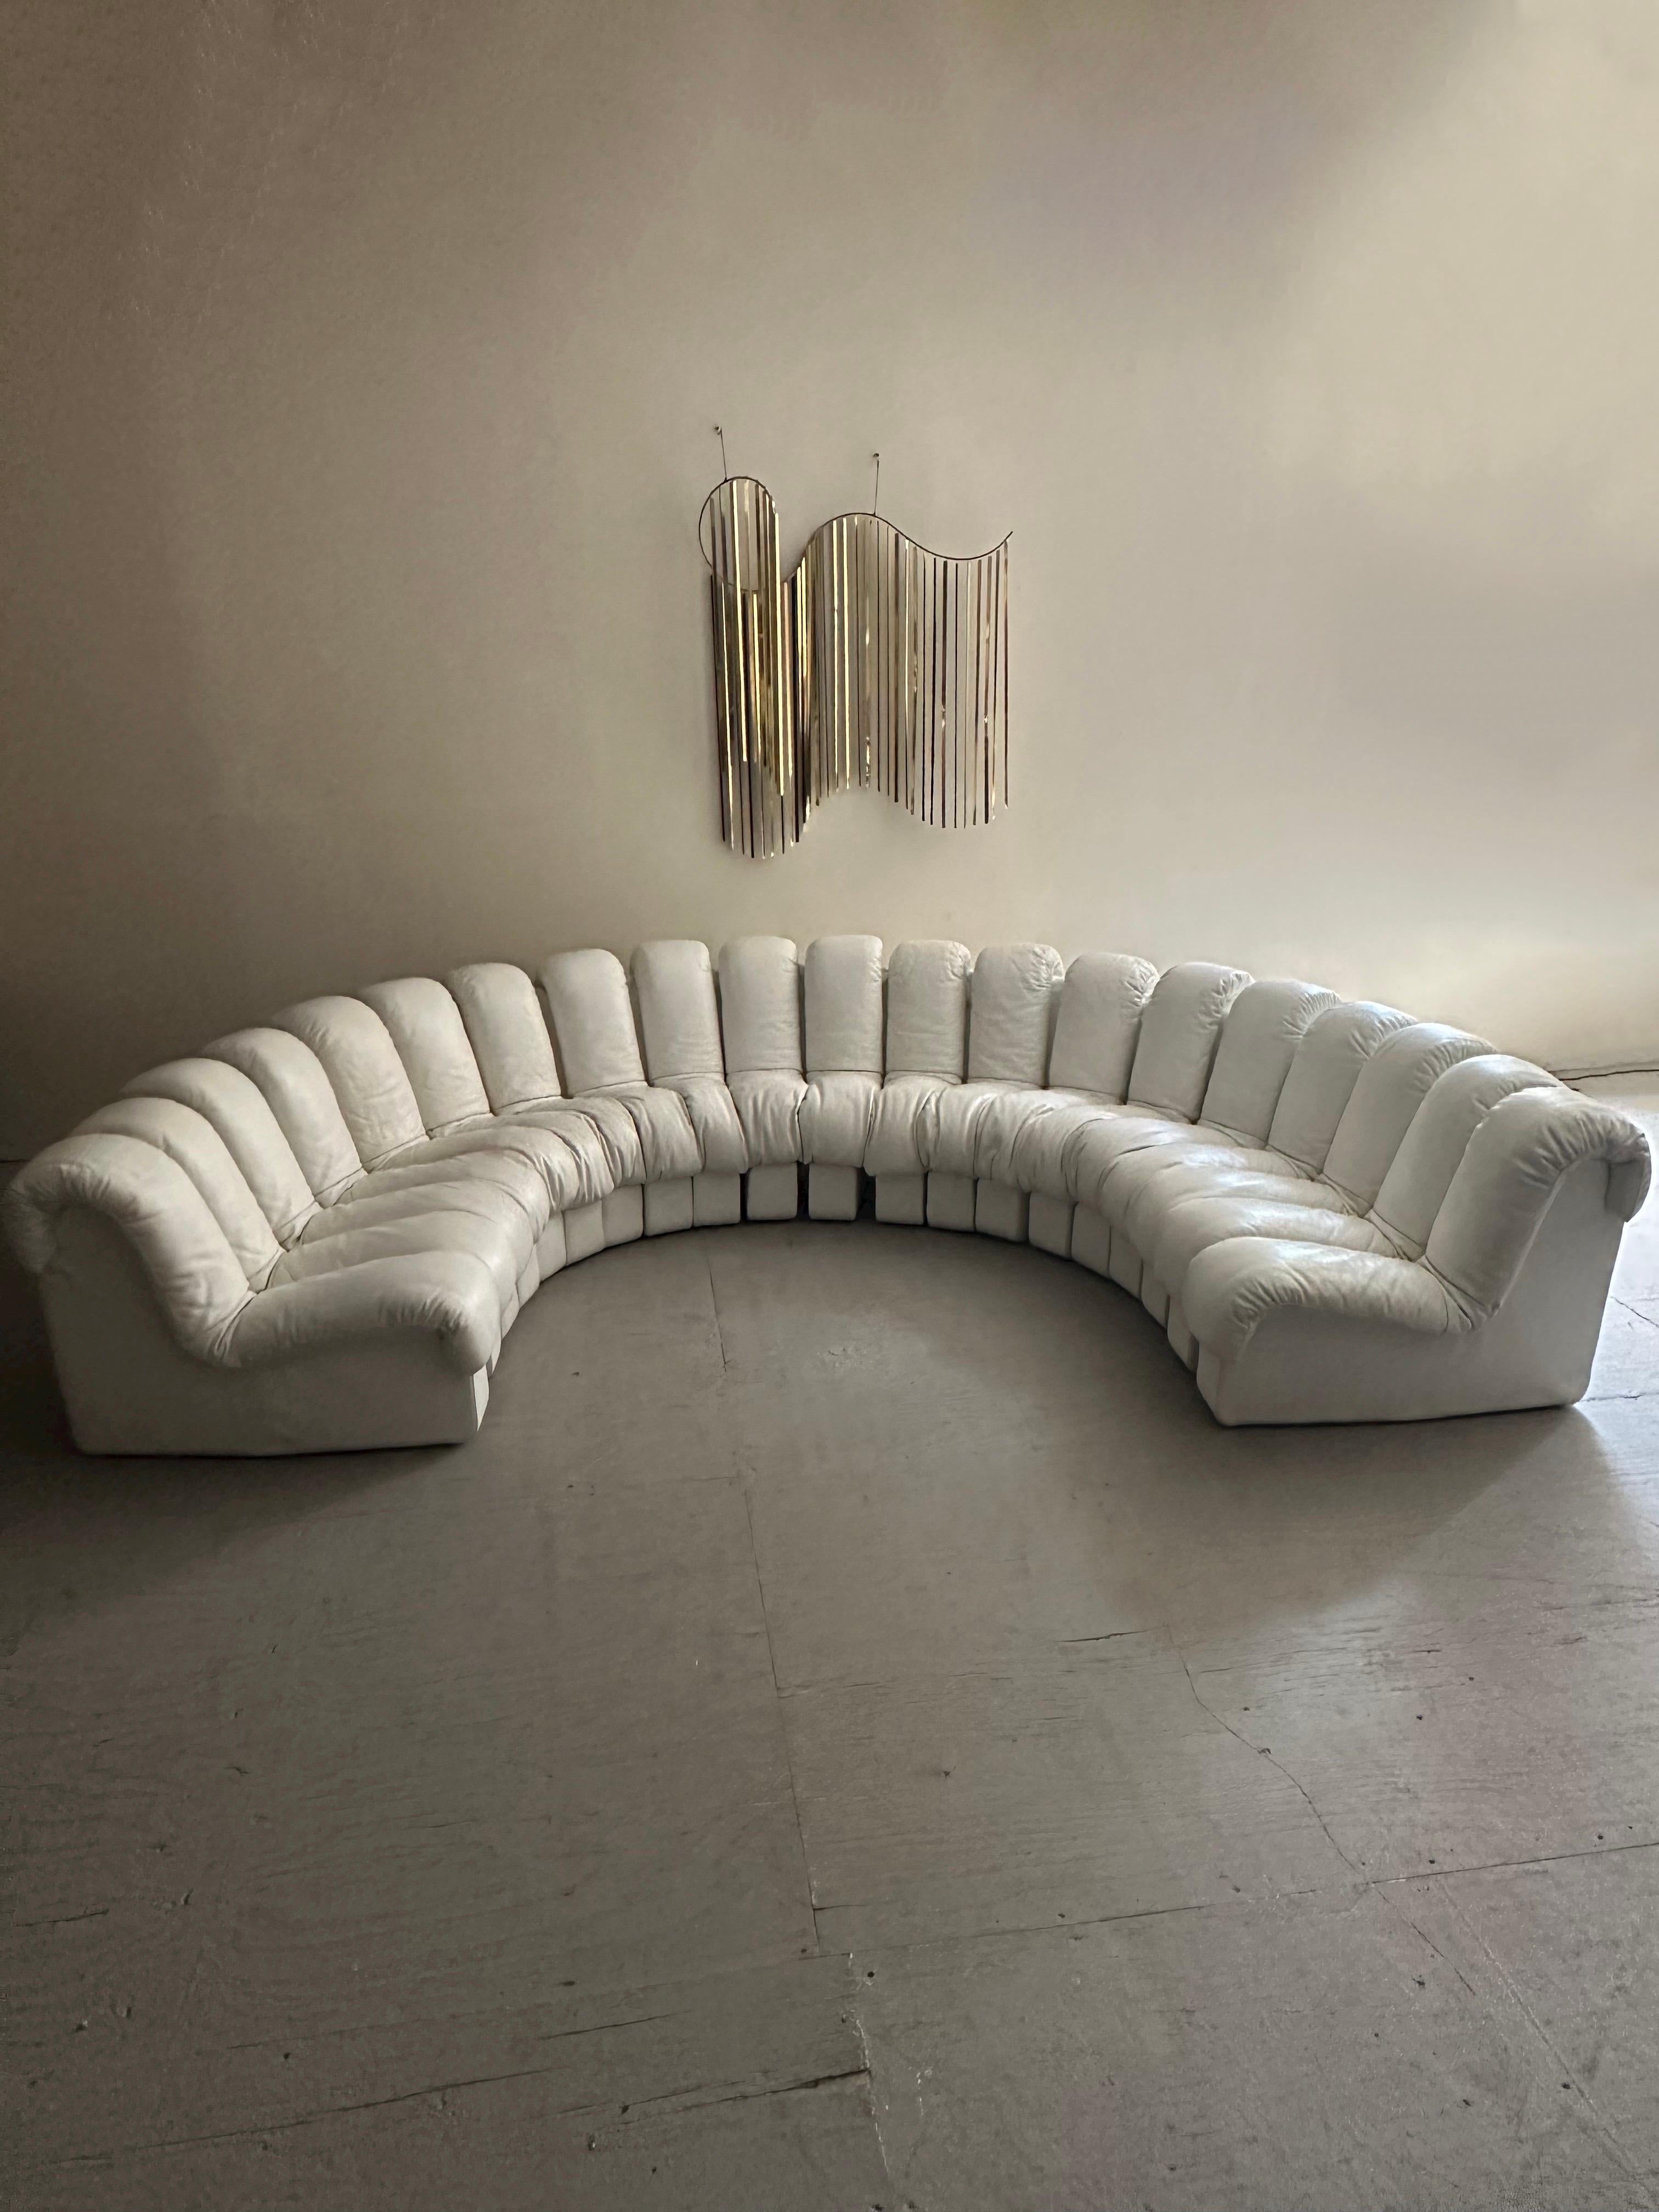 A monumental Mid-Century classic designed in collaboration by Ueli Bergere, Elenora Peduzzi-Riva, Heinz Ulrich and Klaus Vogt at De Sede, Switzerland. Comes wrapped in original white leather upholstery. This modular sectional sofa with endless